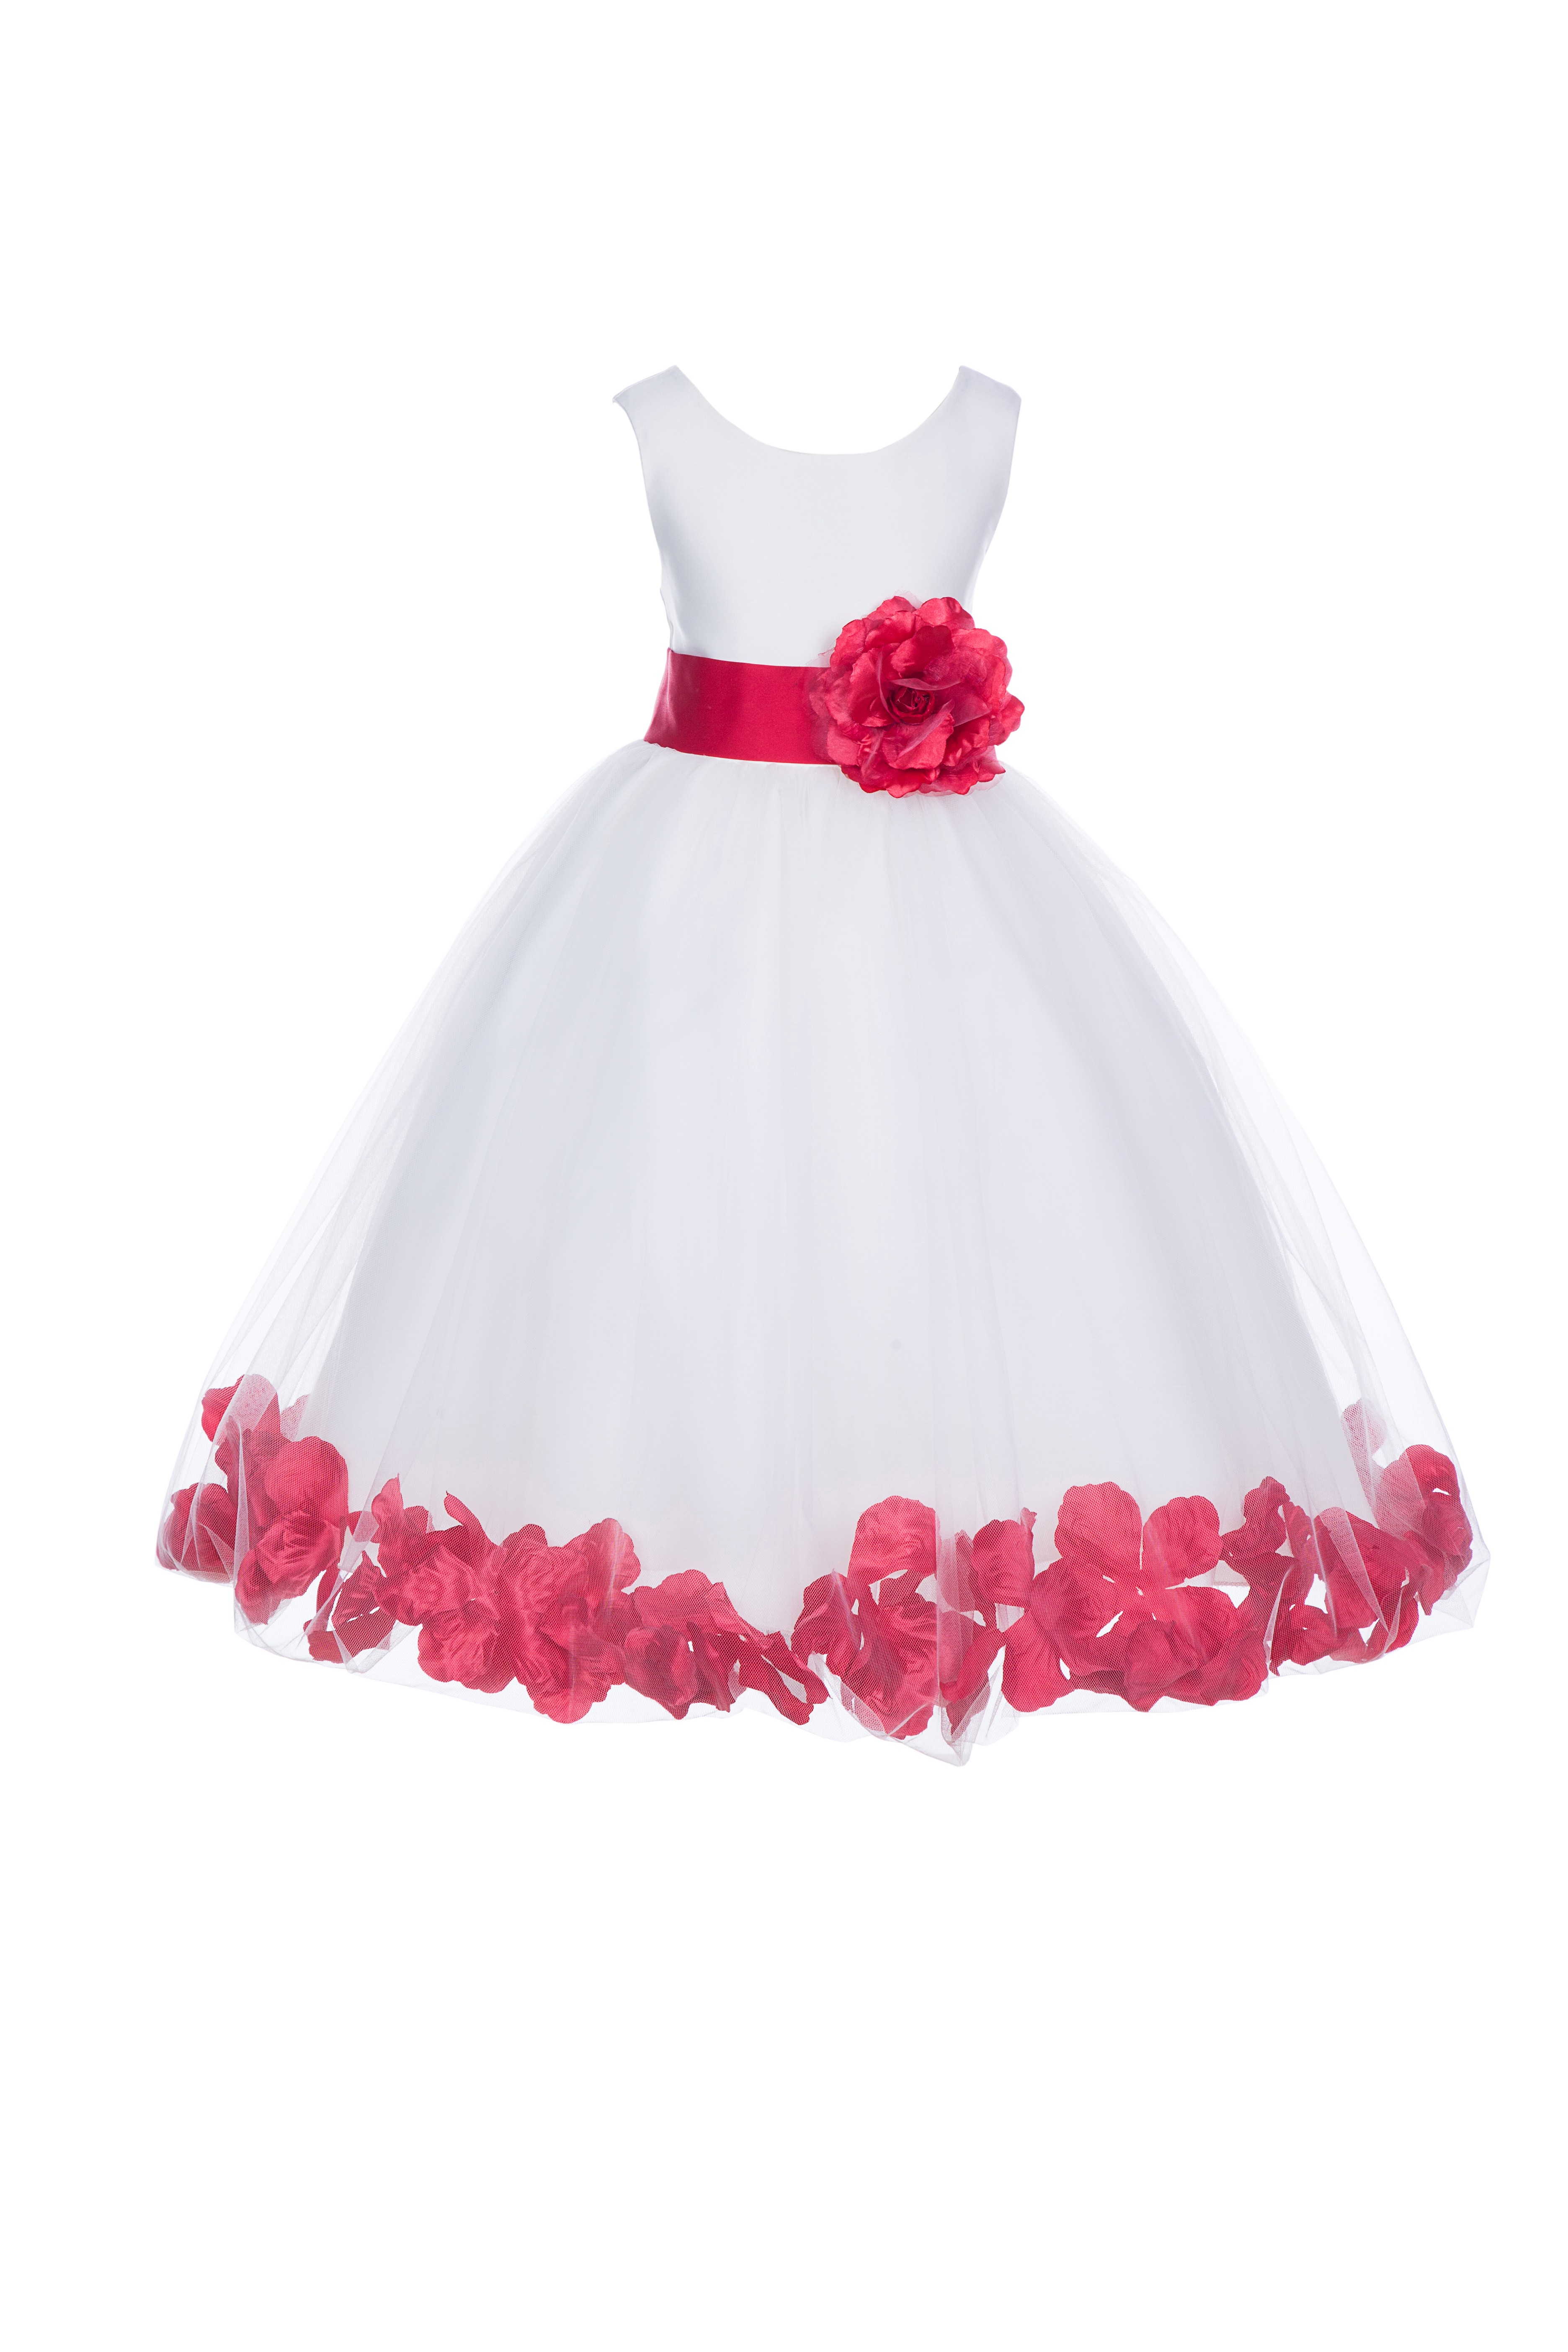 Ivory/Cherry Tulle Rose Petals Flower Girl Dress Pageant 302S